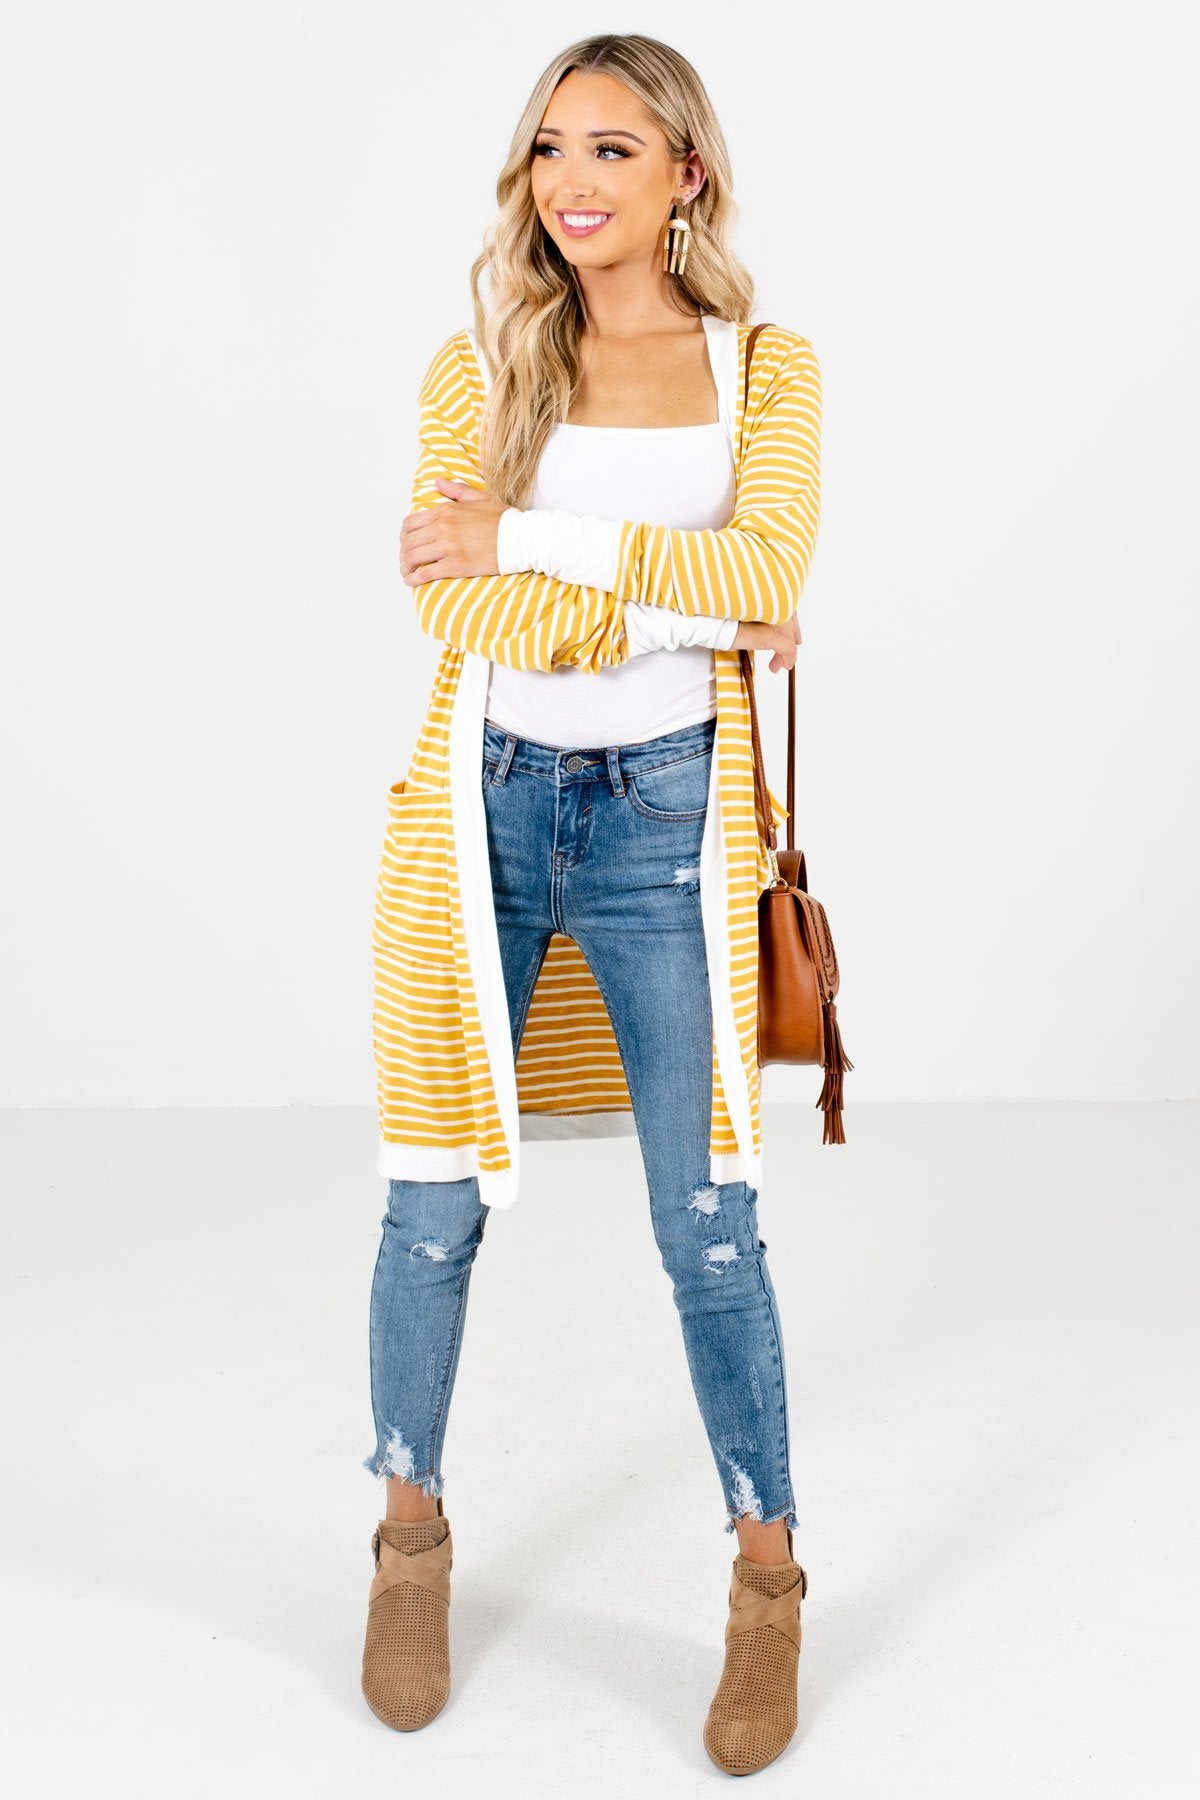 Women’s Yellow High-Quality Material Boutique Cardigan